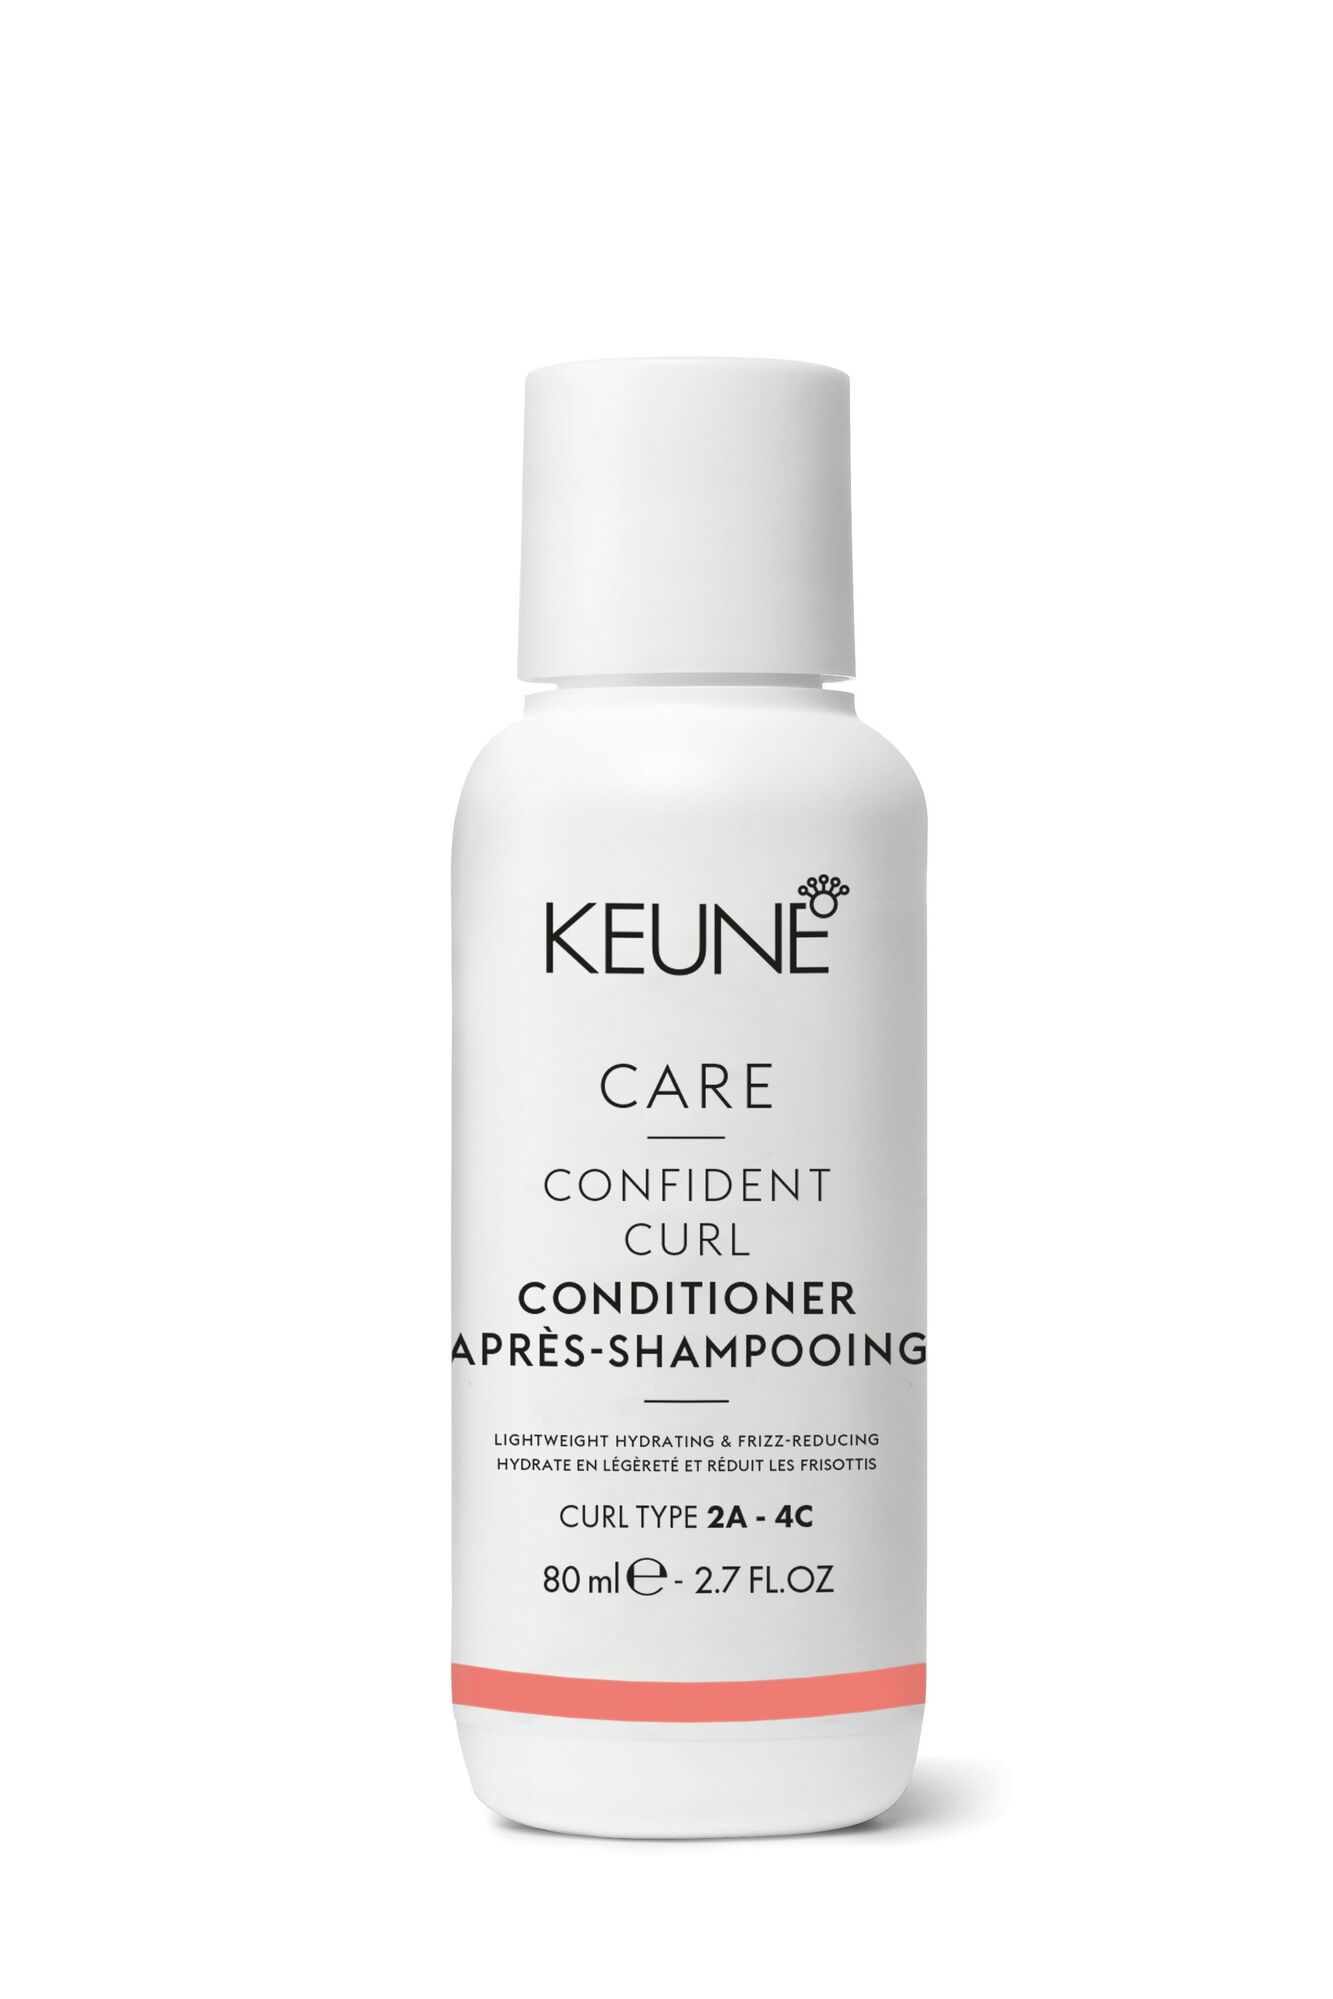 Our hair care product, the Confident Curl Conditioner, is ideal for elastic curls. It effectively combats frizz and ensures that your curls are easier to comb through. You can find it on keune.ch.